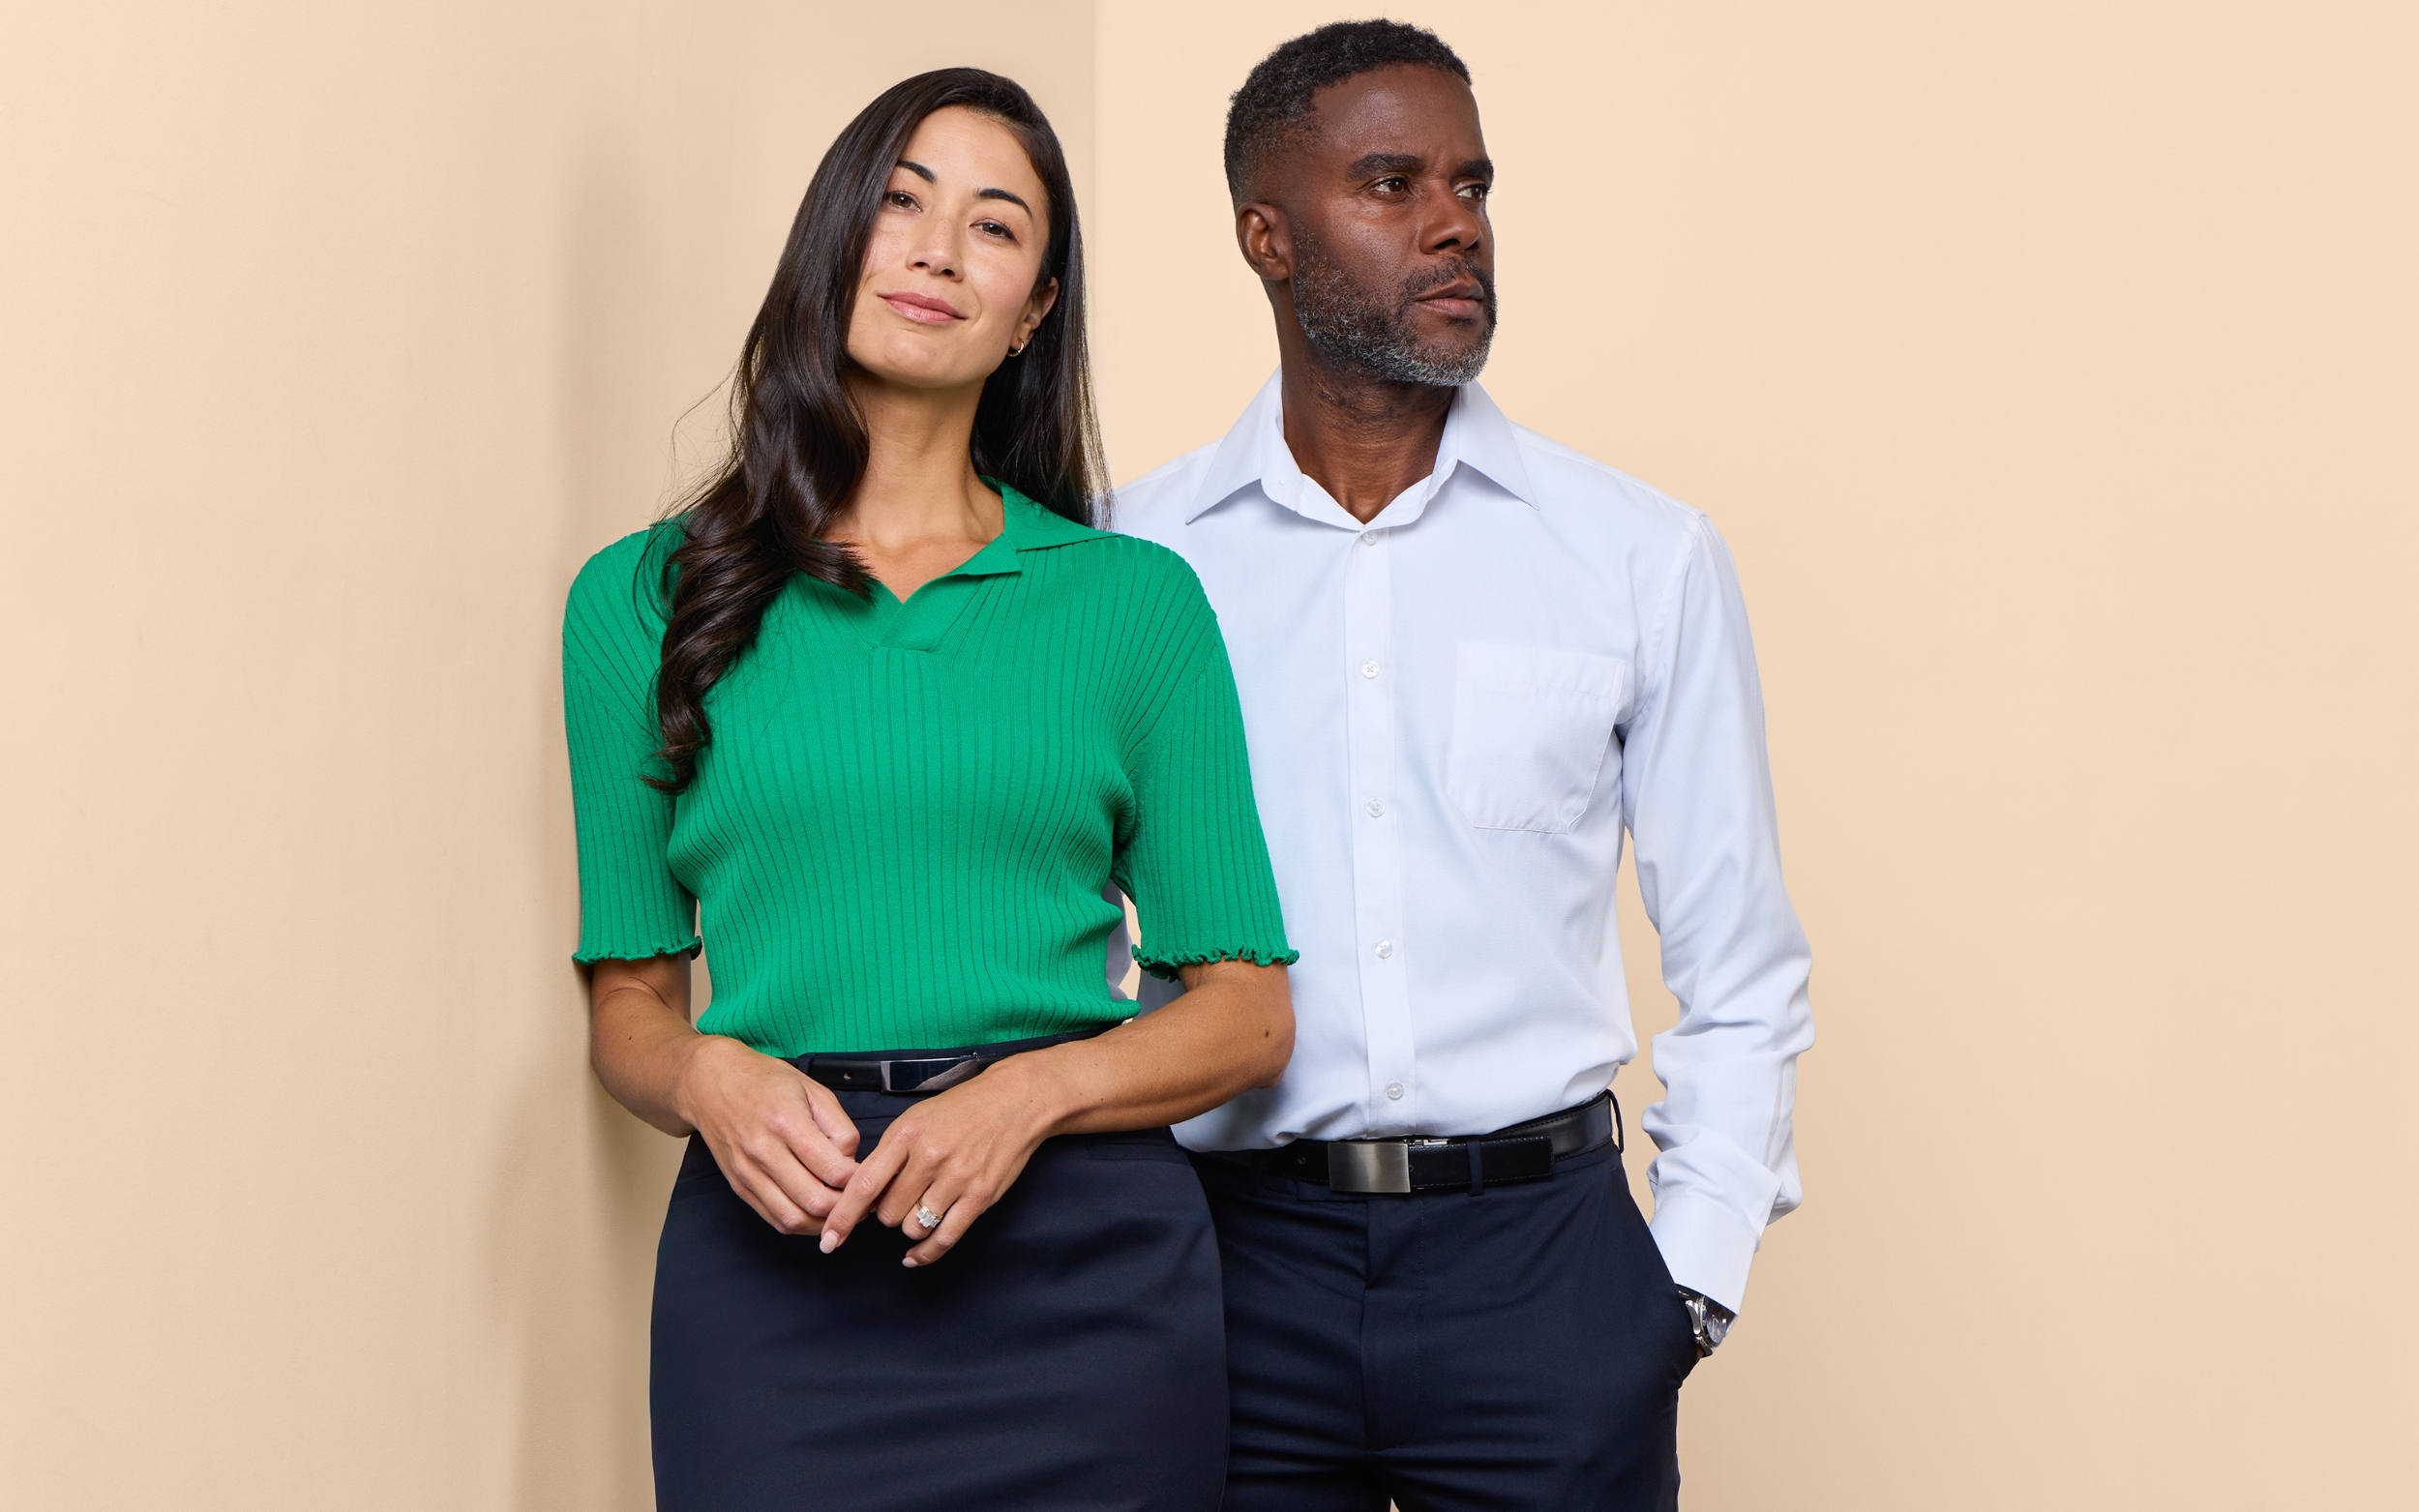 A man and woman standing side by side against a beige background, the woman to the left wearing a green ribbed polo shirt and navy skirt, the man to the right in a light blue button-up shirt and dark trousers.